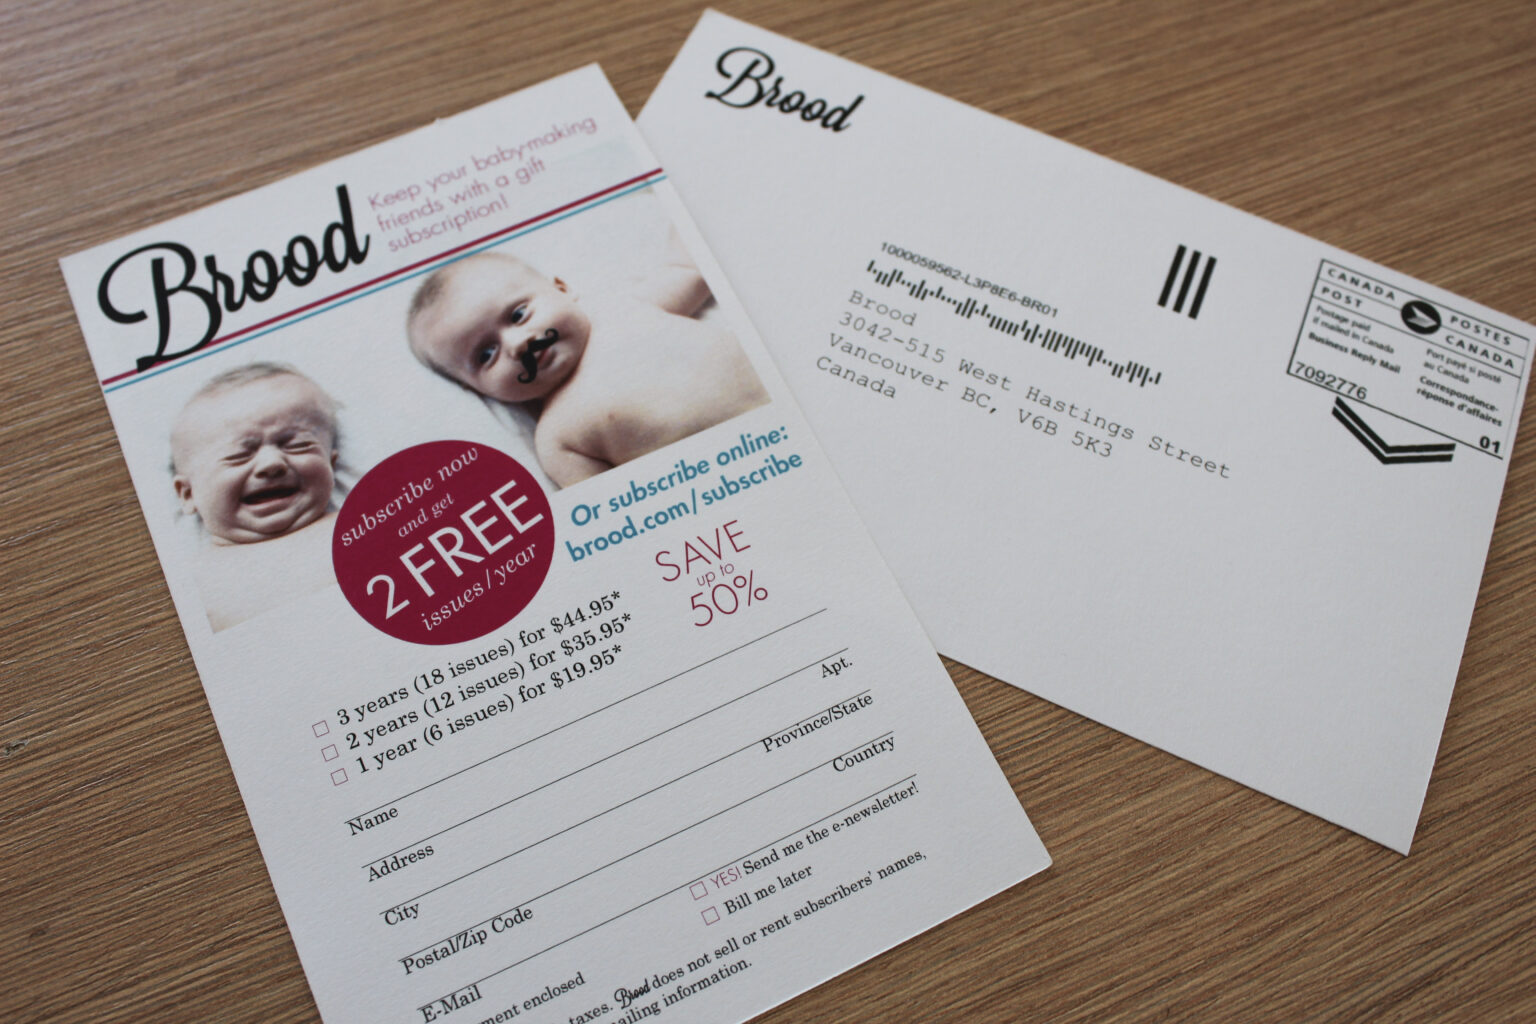 Brood project materials – subscription cards